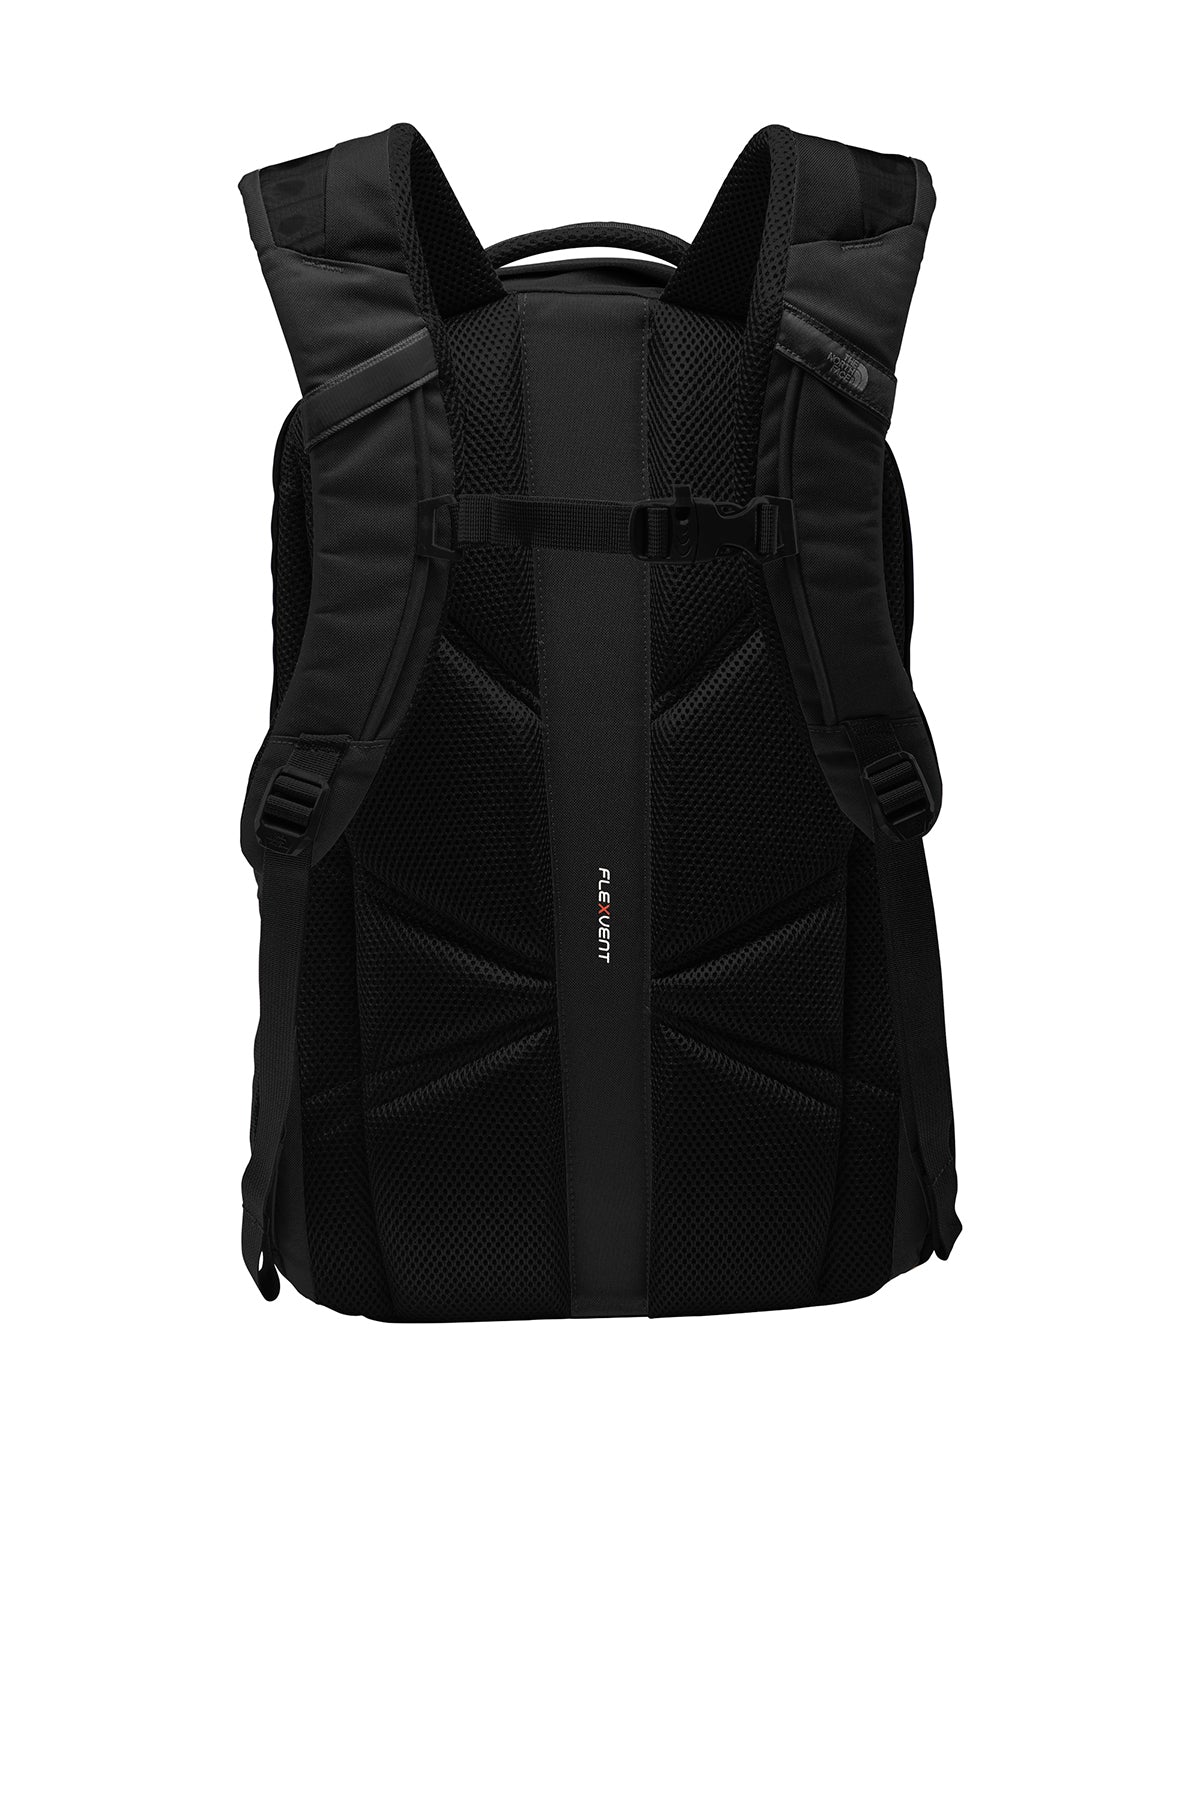 North Face Groundwork Backpack TNF Black